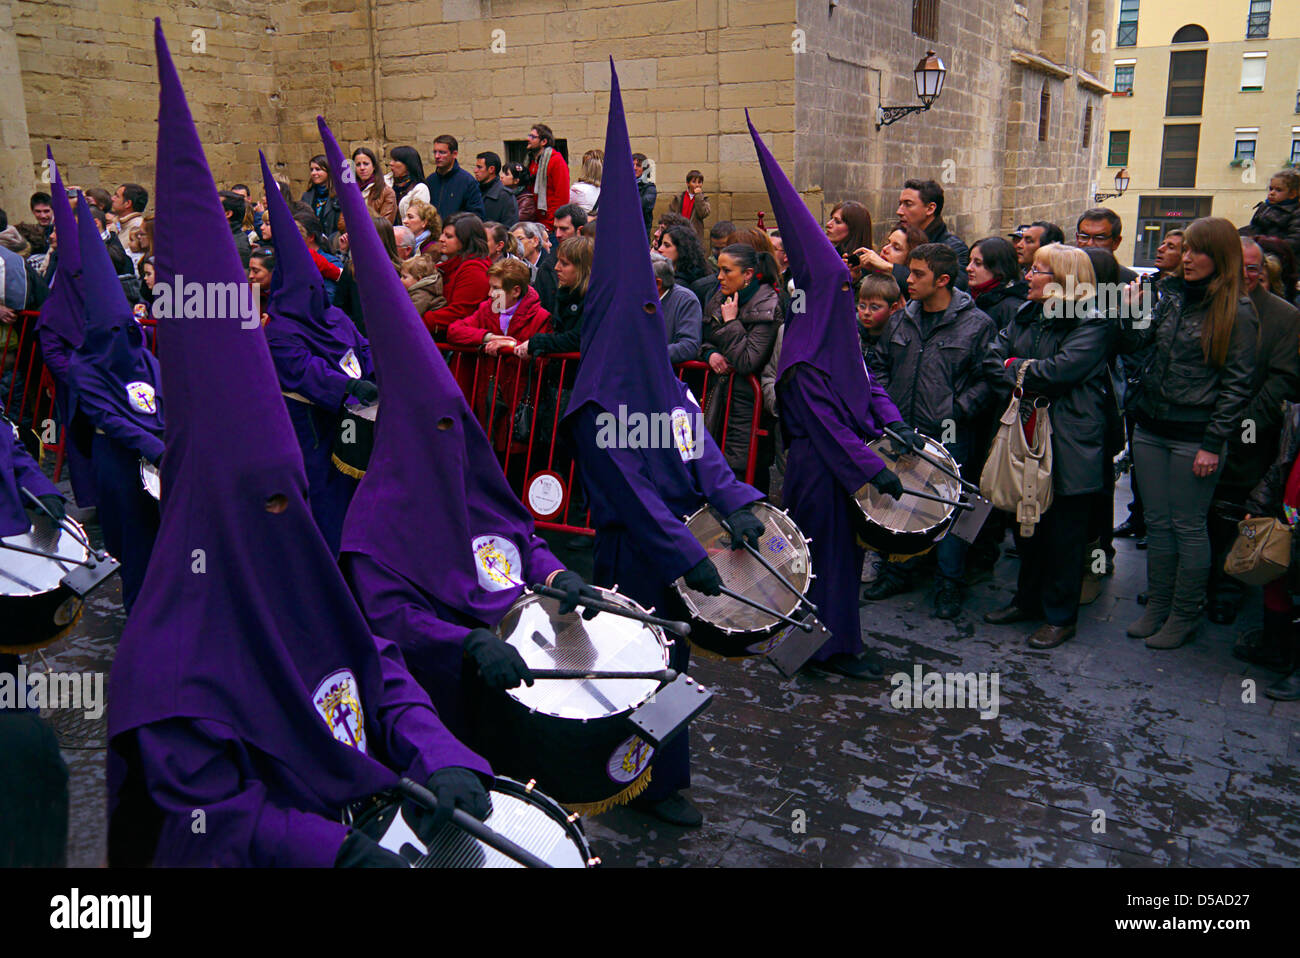 Easter Pagent in logroño Northern Spain, on the camino De Santiago de compostela route. Stock Photo